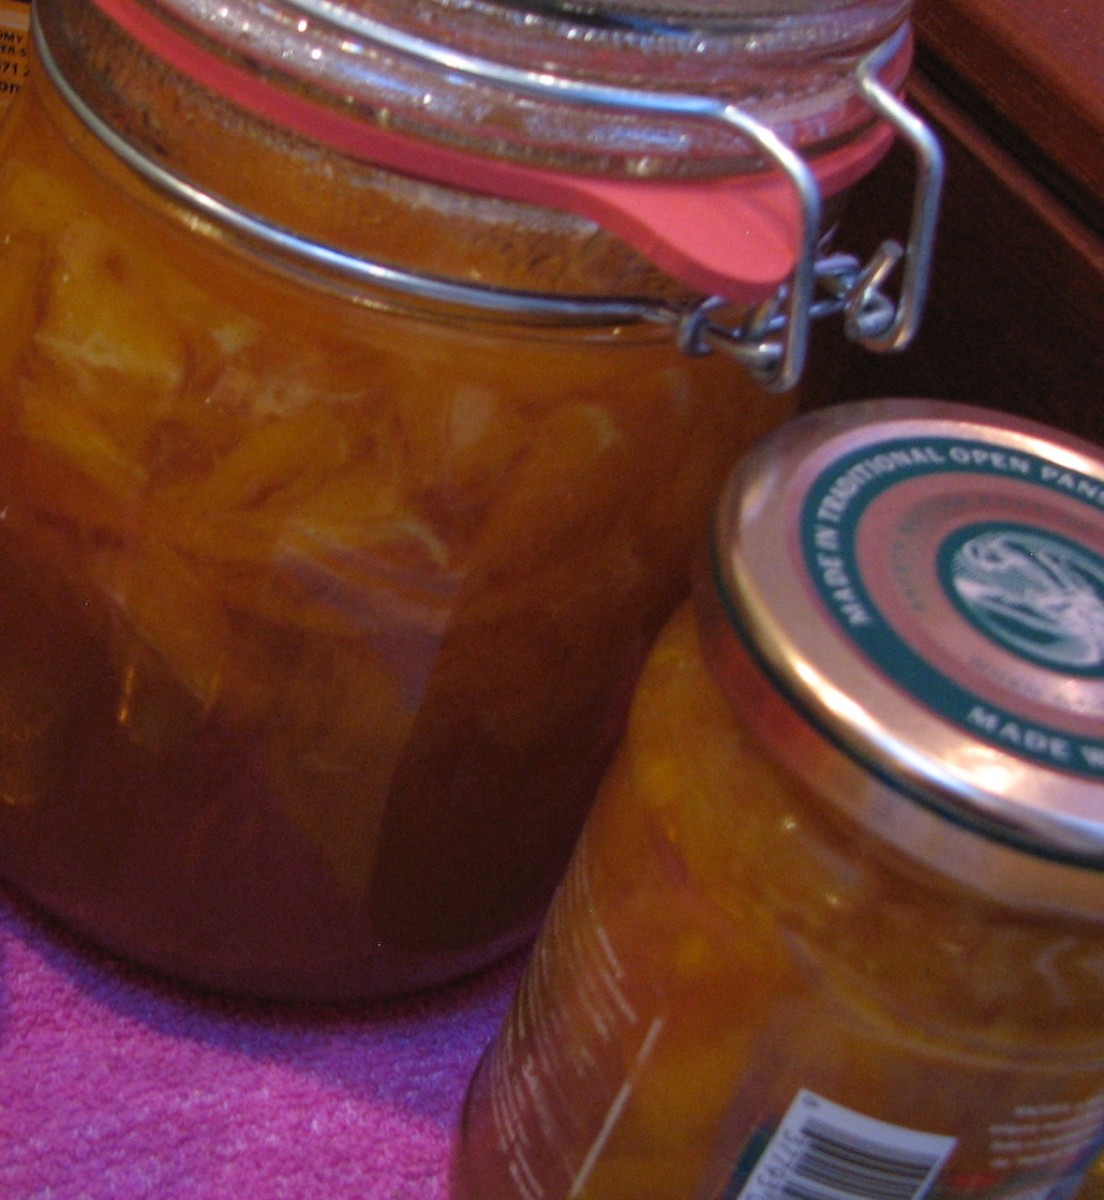 Bottled orange vanilla compote in glass jars. The compote has a lot more liquid than the marmalade.